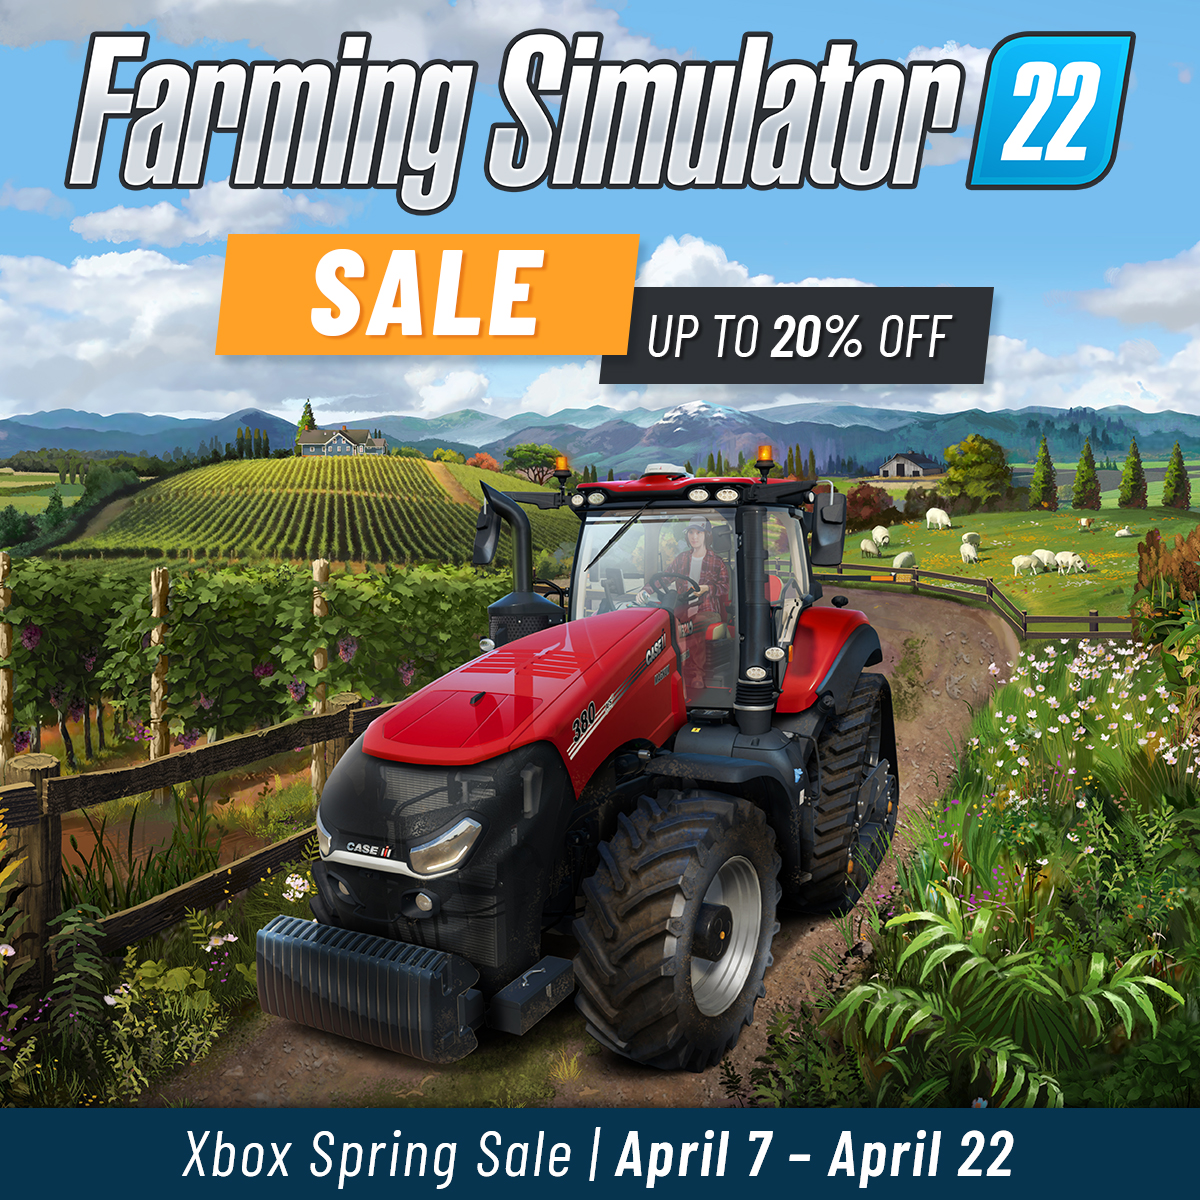 Ligatie wijn Overredend Farming Simulator on Twitter: "Farming Simulator 22 is now on sale on Xbox  until April 22nd. Check it out on the Microsoft Store via this link:  https://t.co/LVDKsNmiXC or access the store on